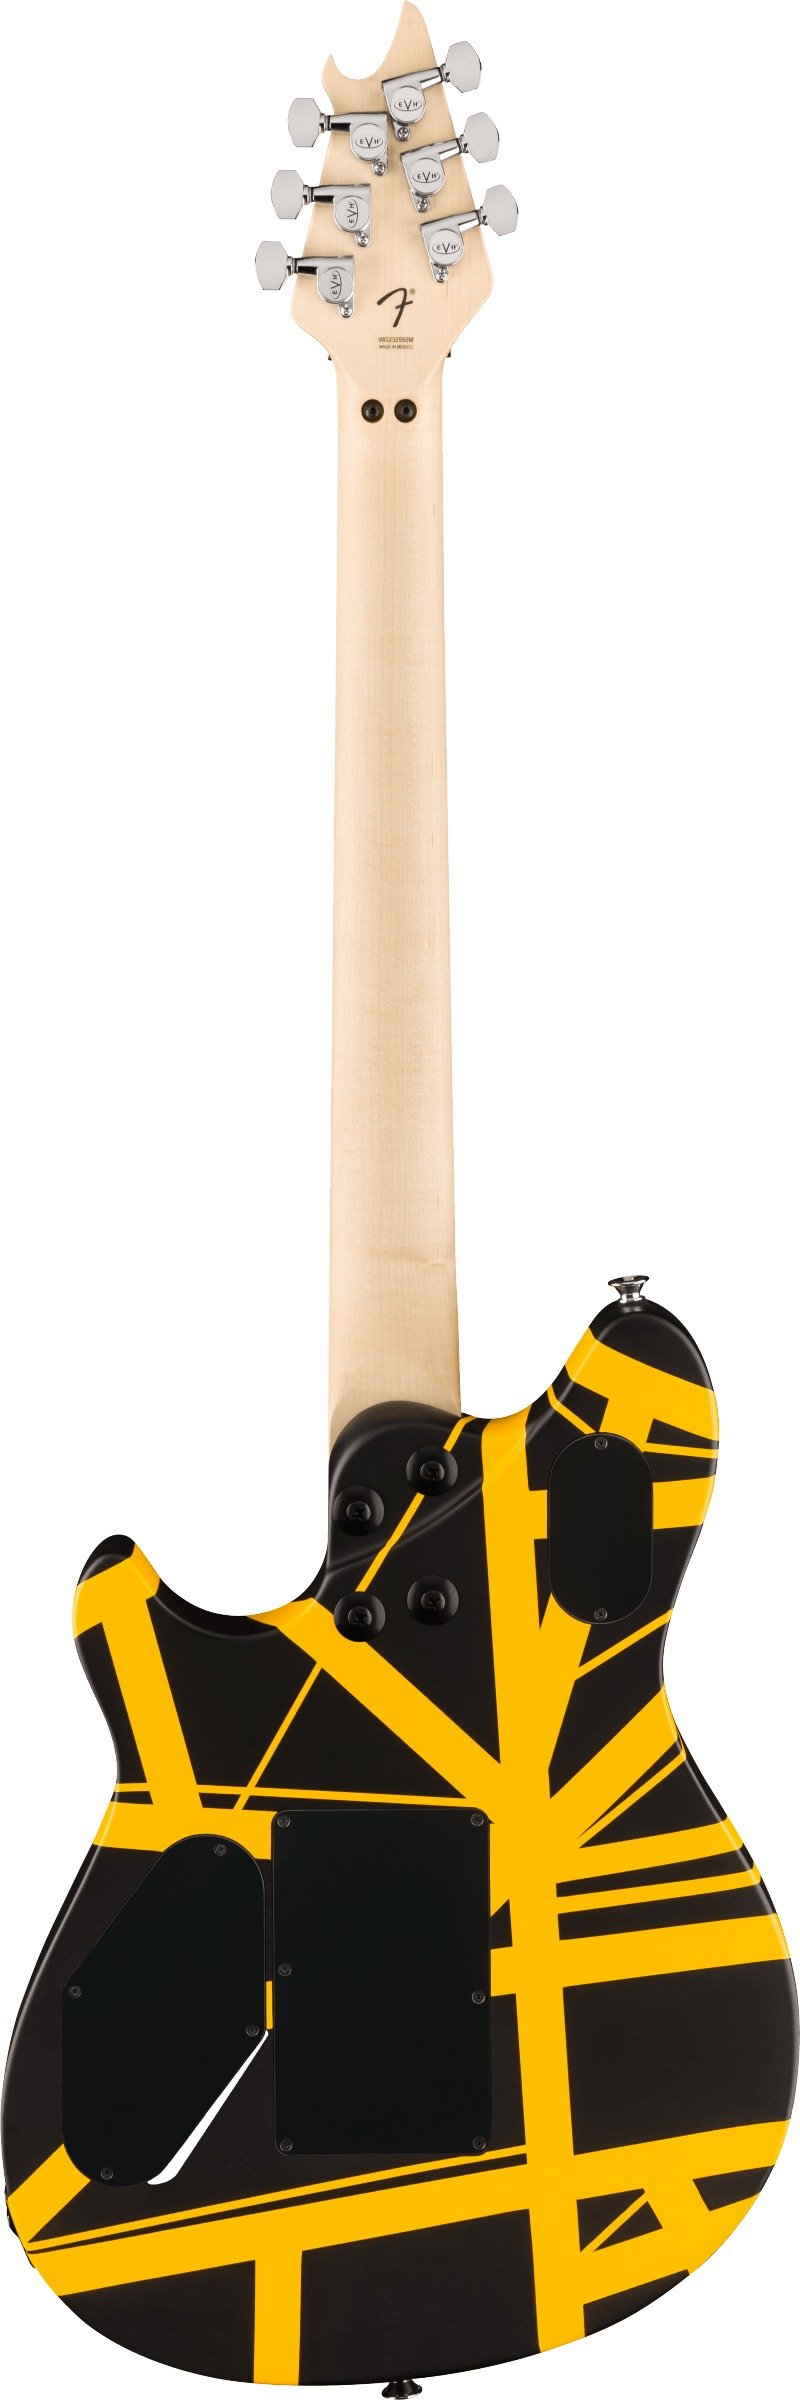 Wolfgang Special Electric Guitar - Satin Striped Black/Yellow